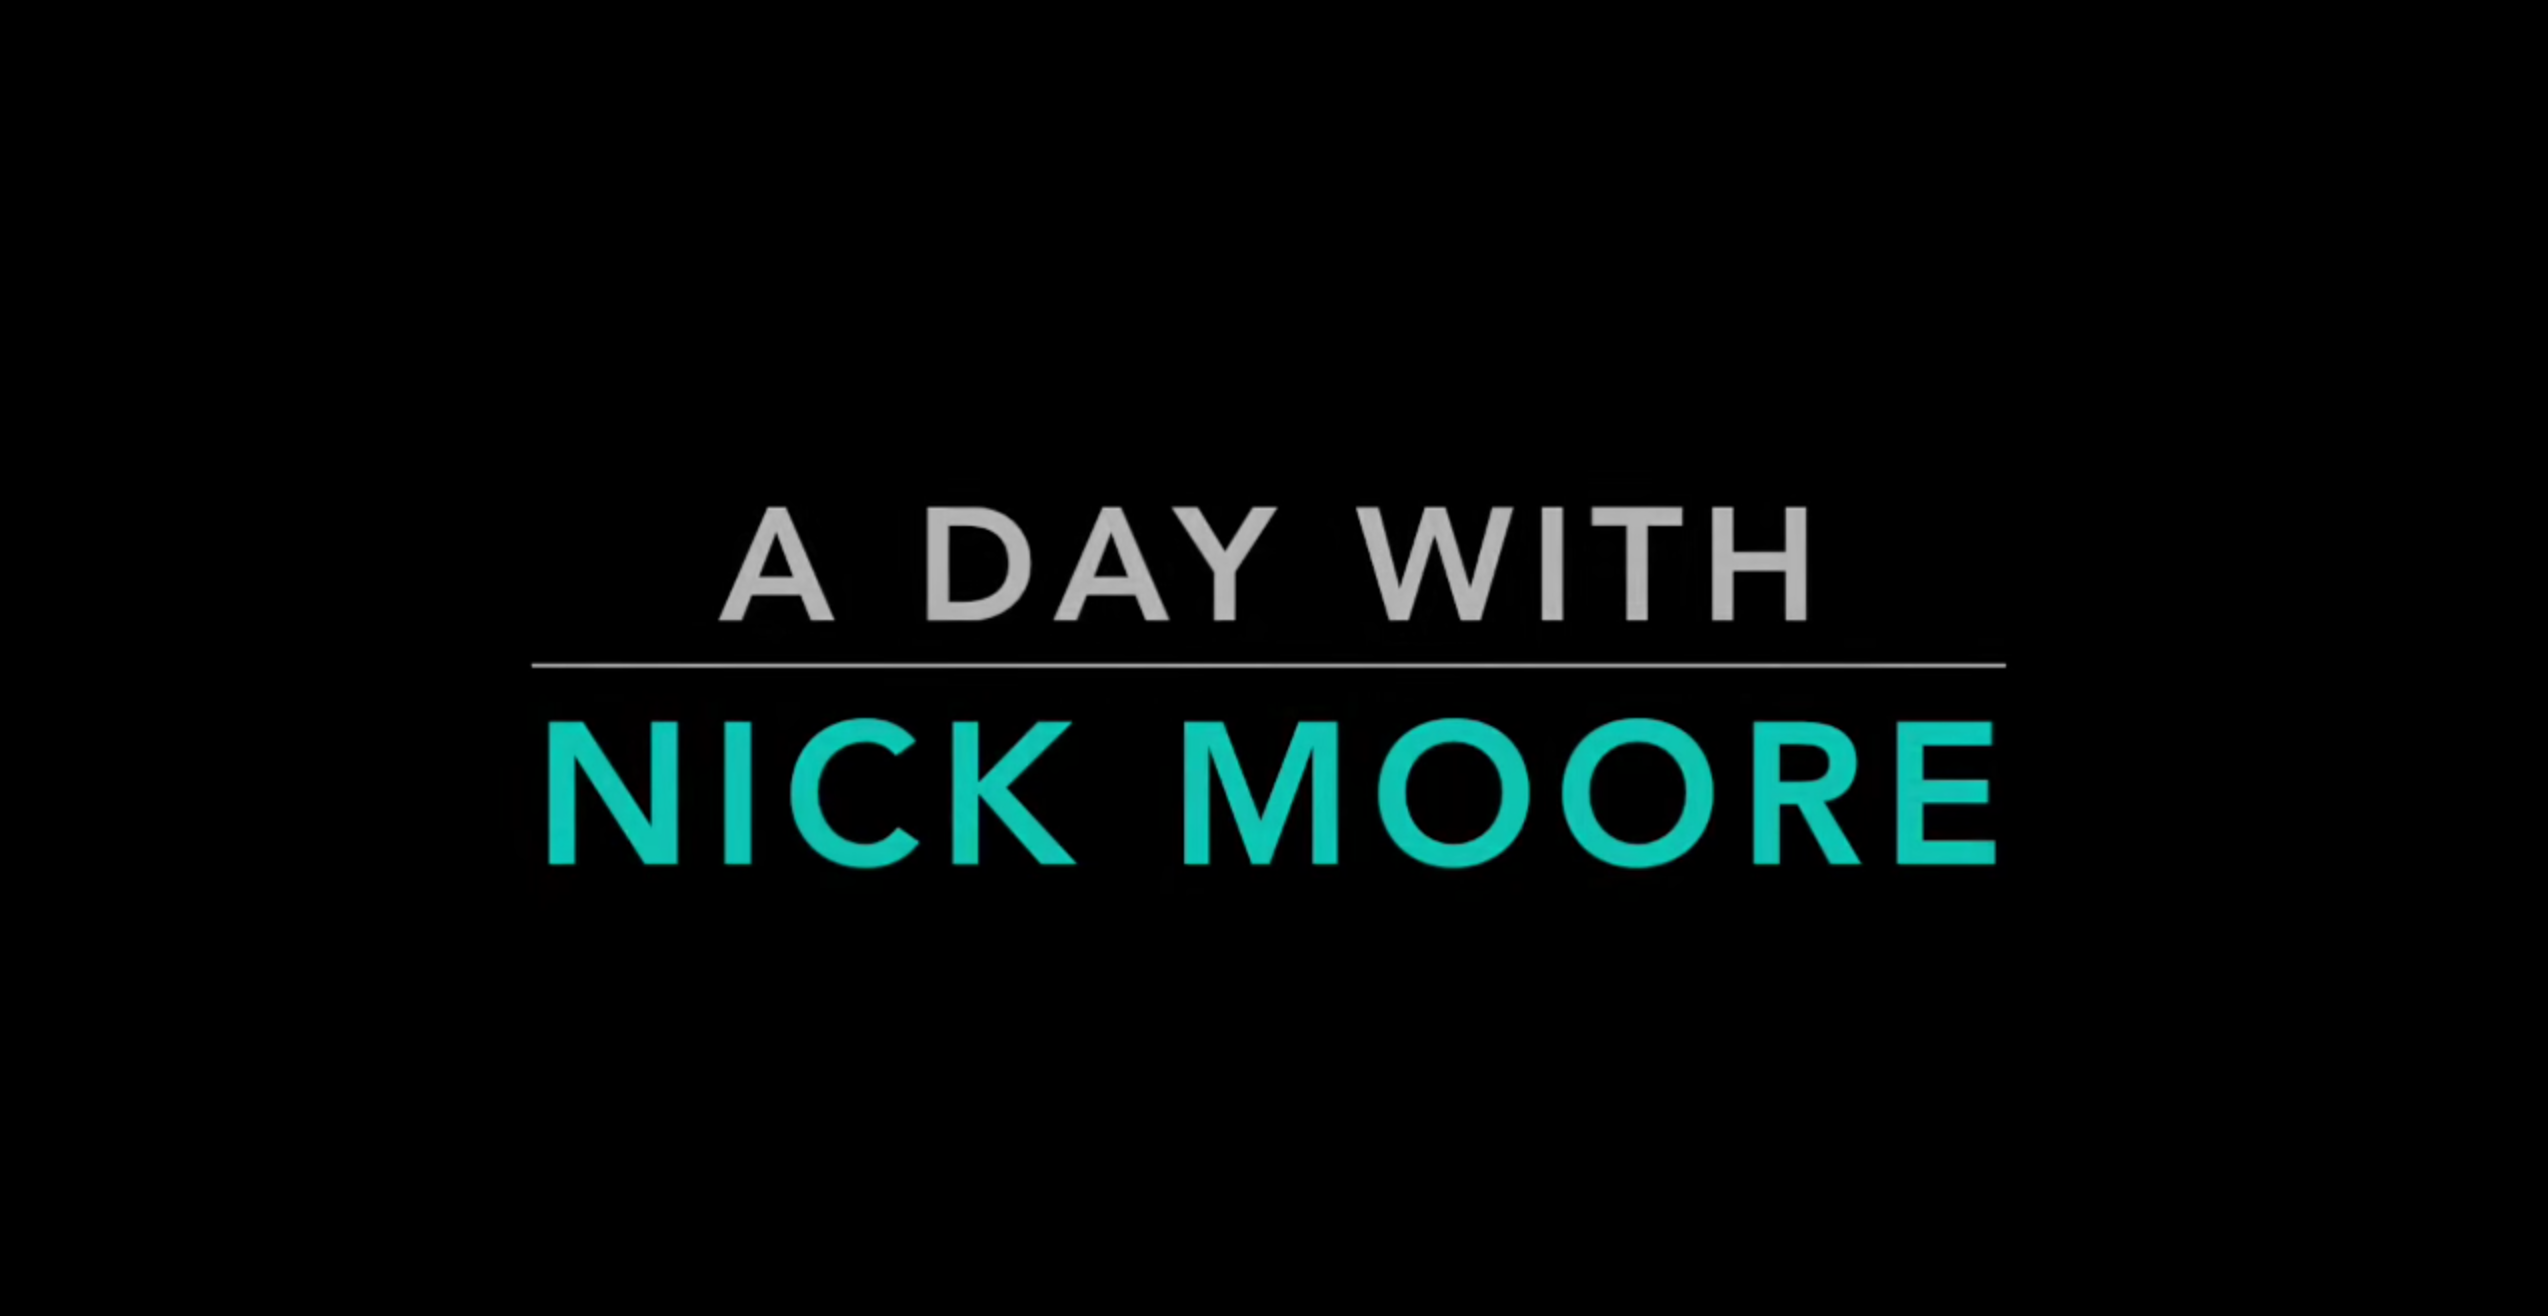 Week 4 - A day with Nick Moore